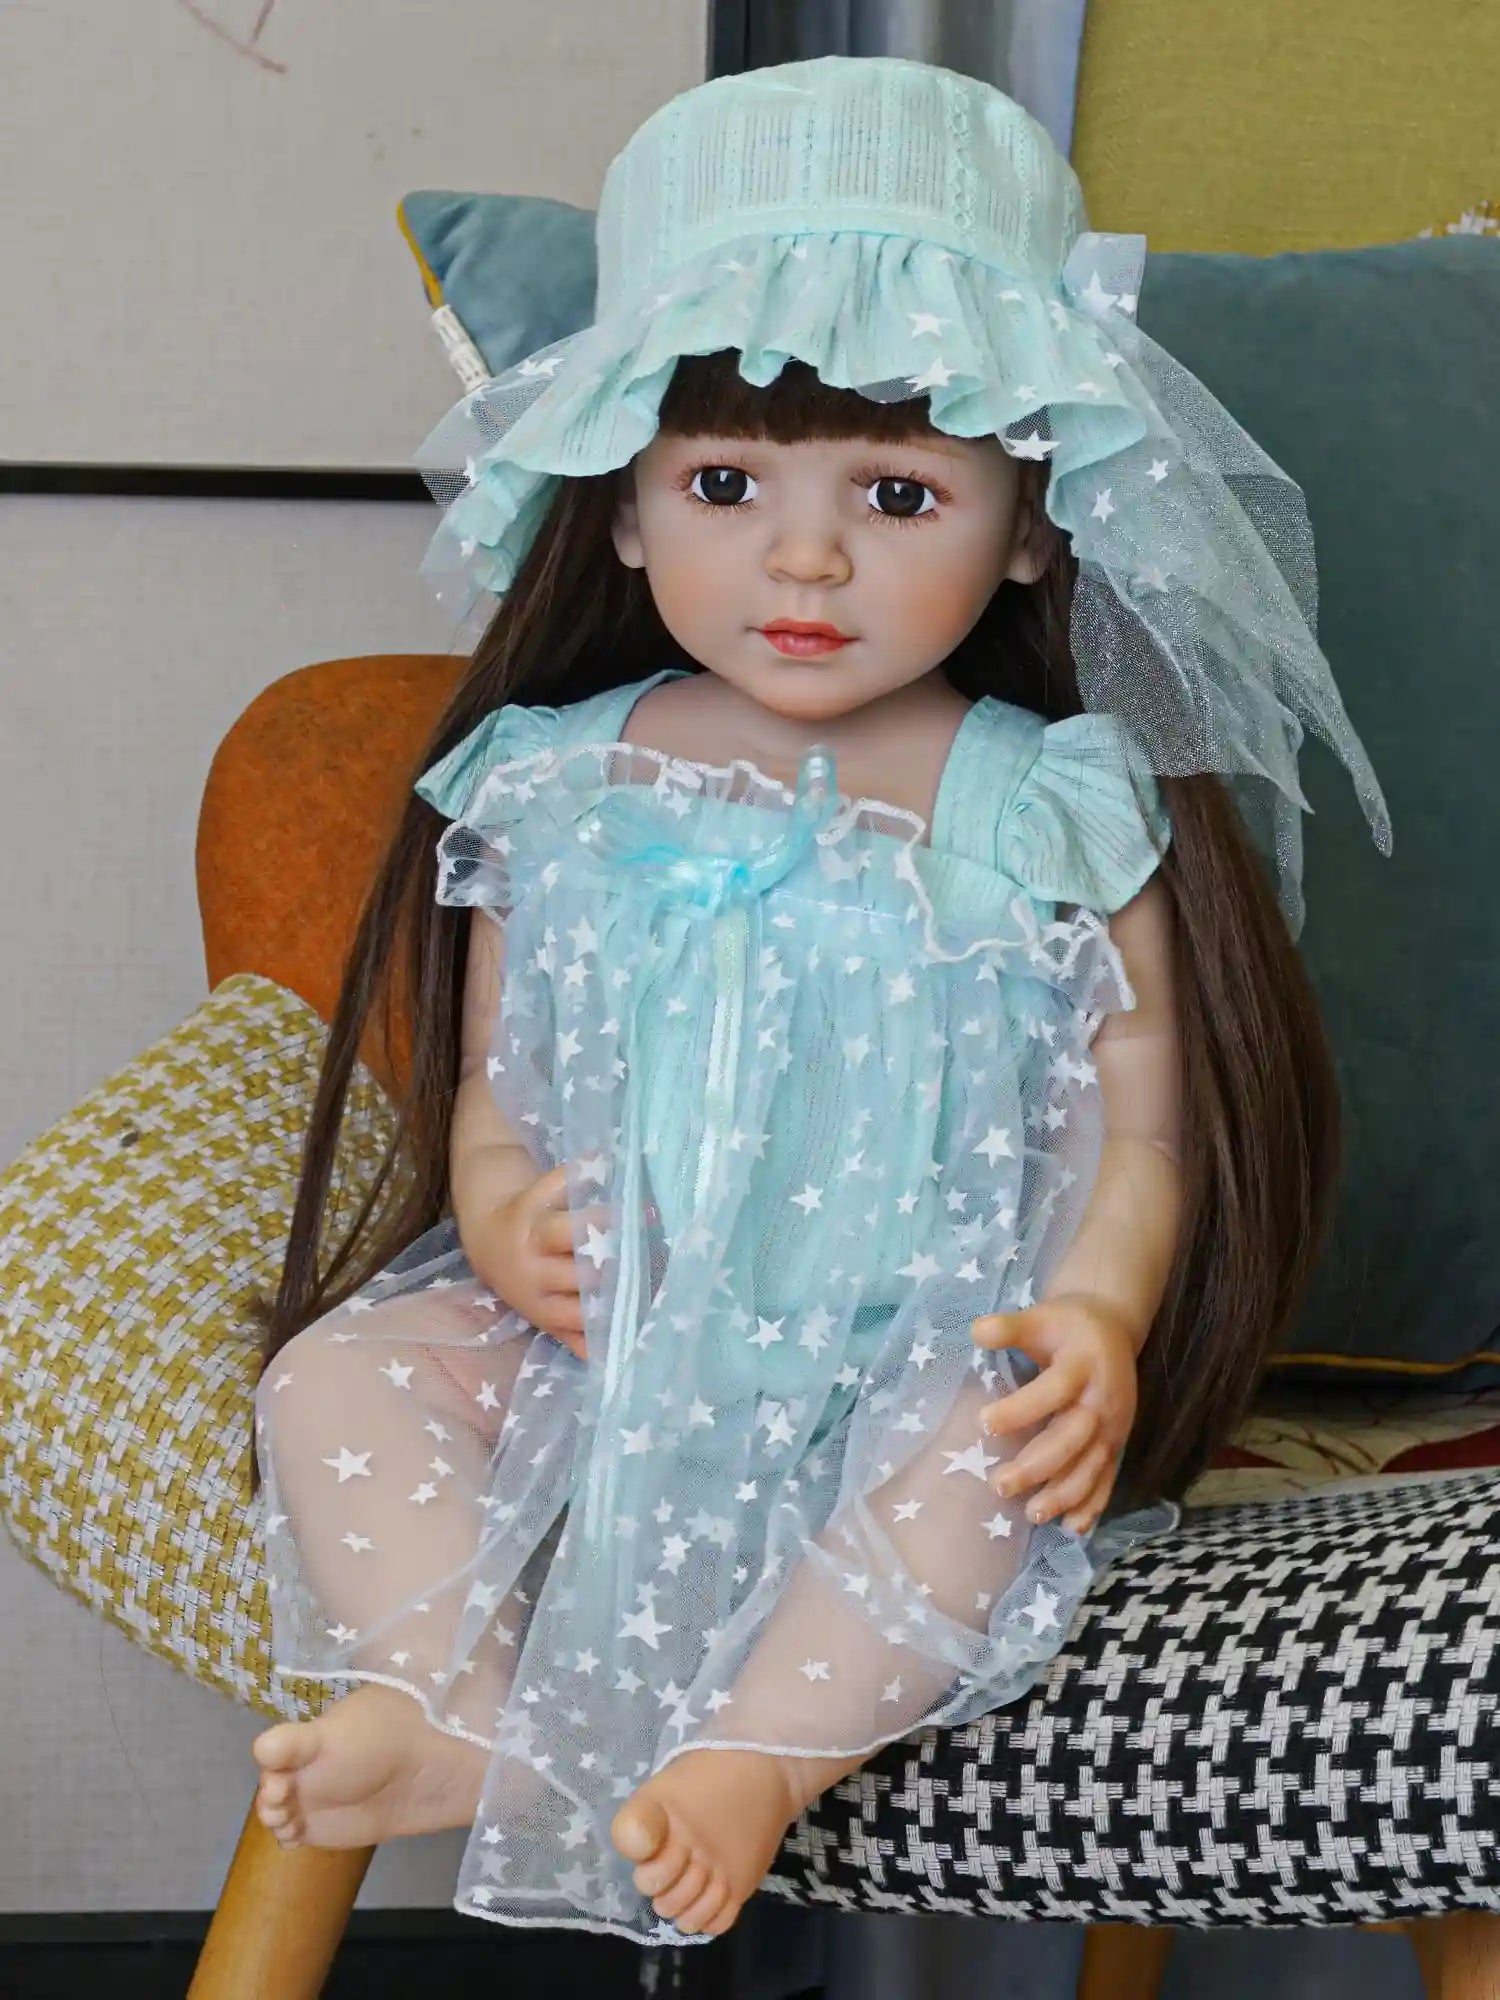 Charming doll with expressive eyes, dressed in a light blue dress with star details.